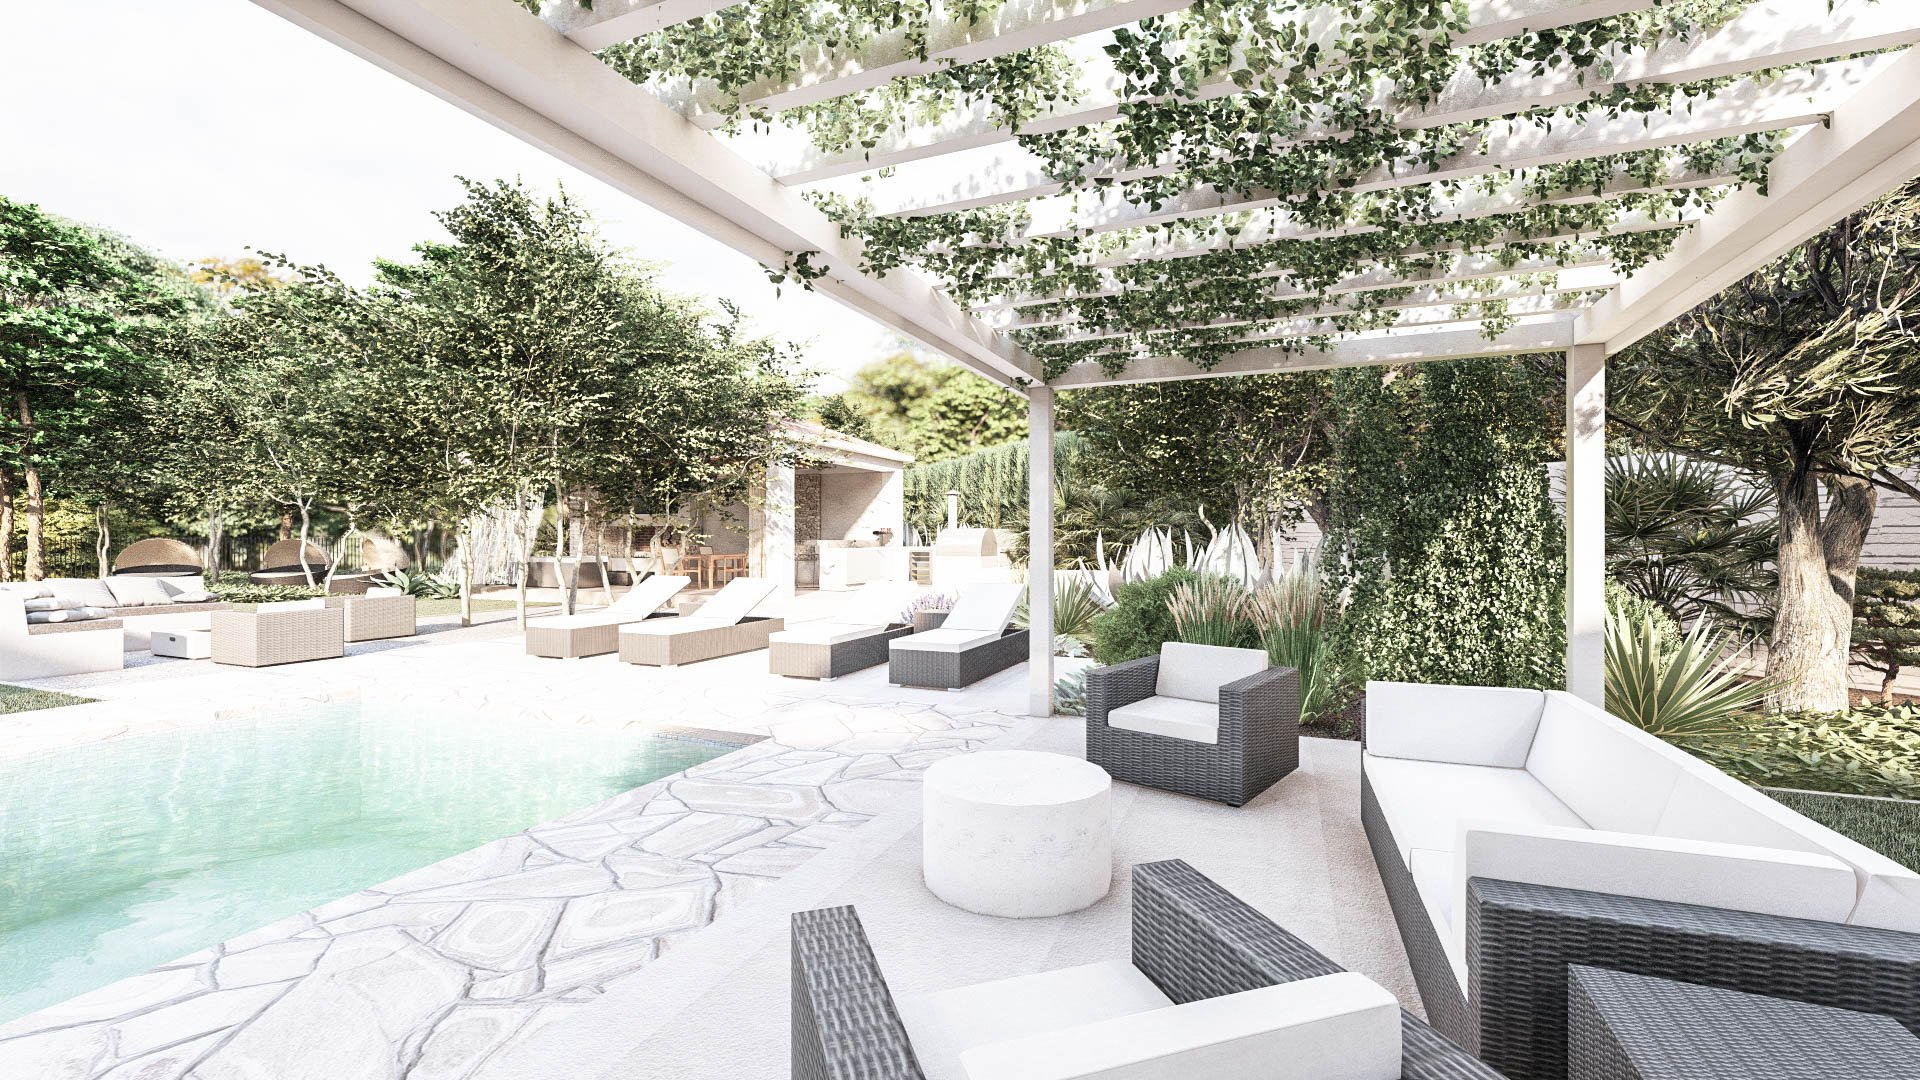 Bright white poolside seating area with modern pergola